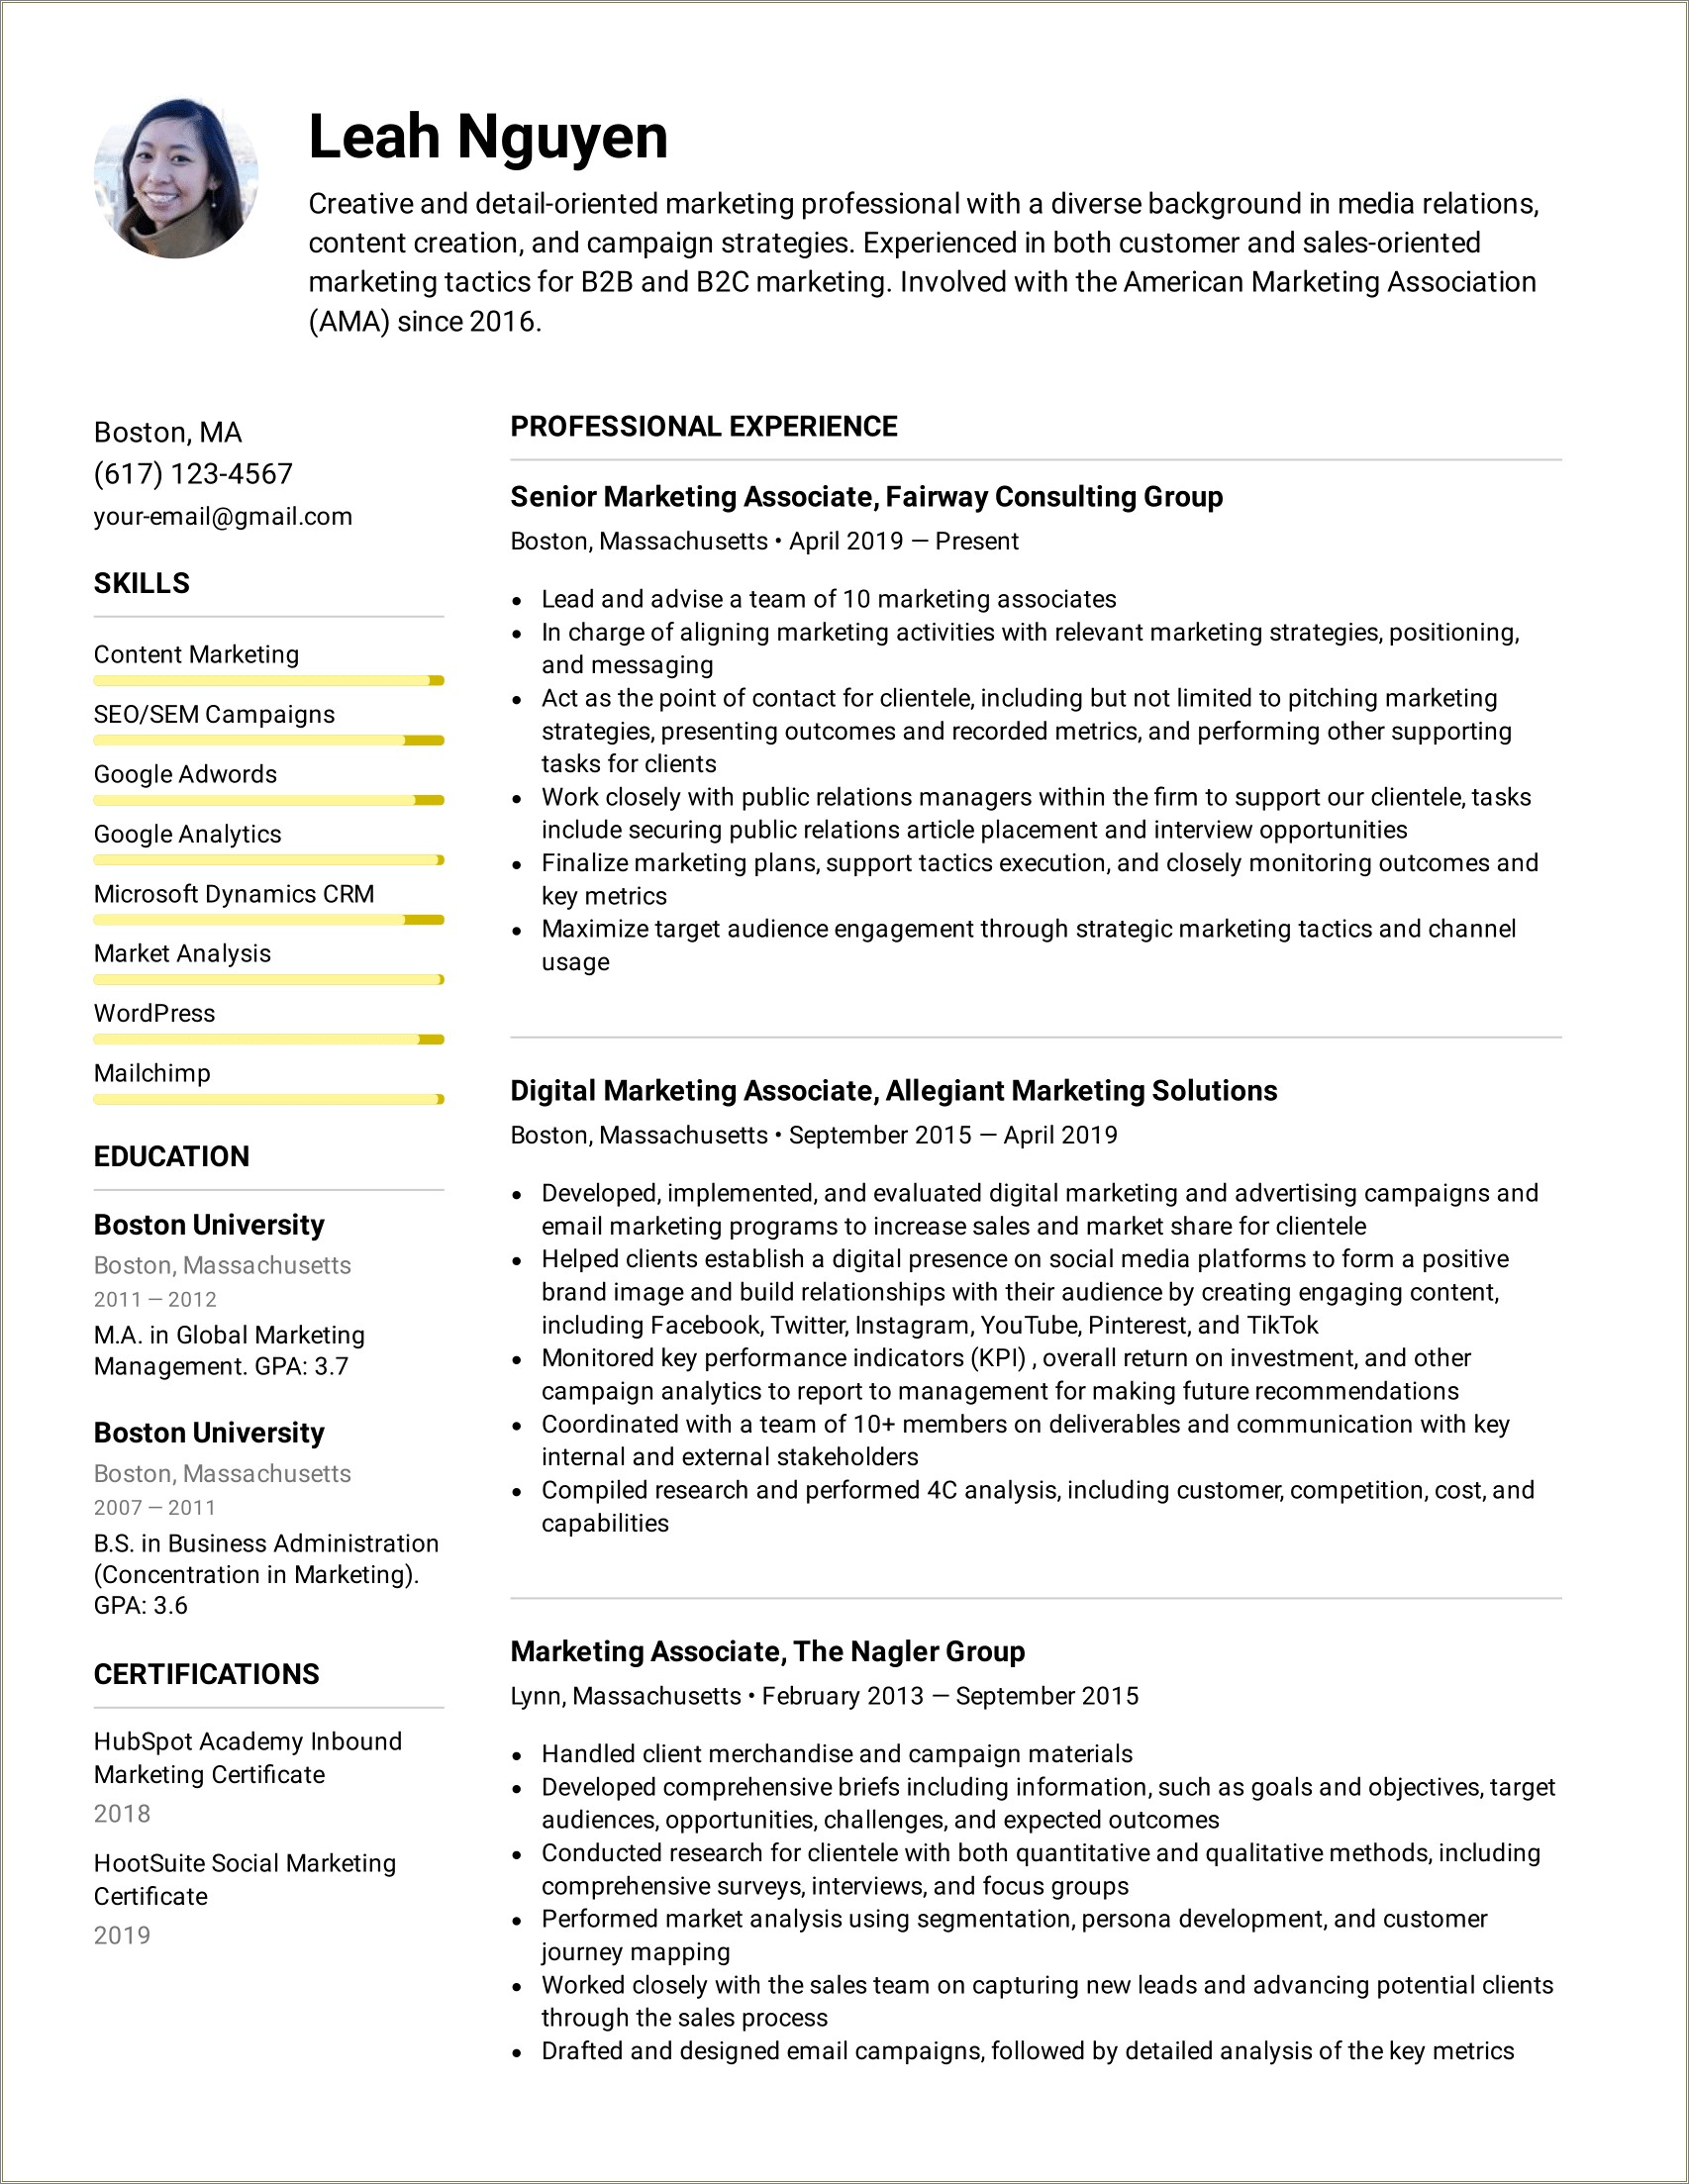 Resume Objective For Sales And Customer Service